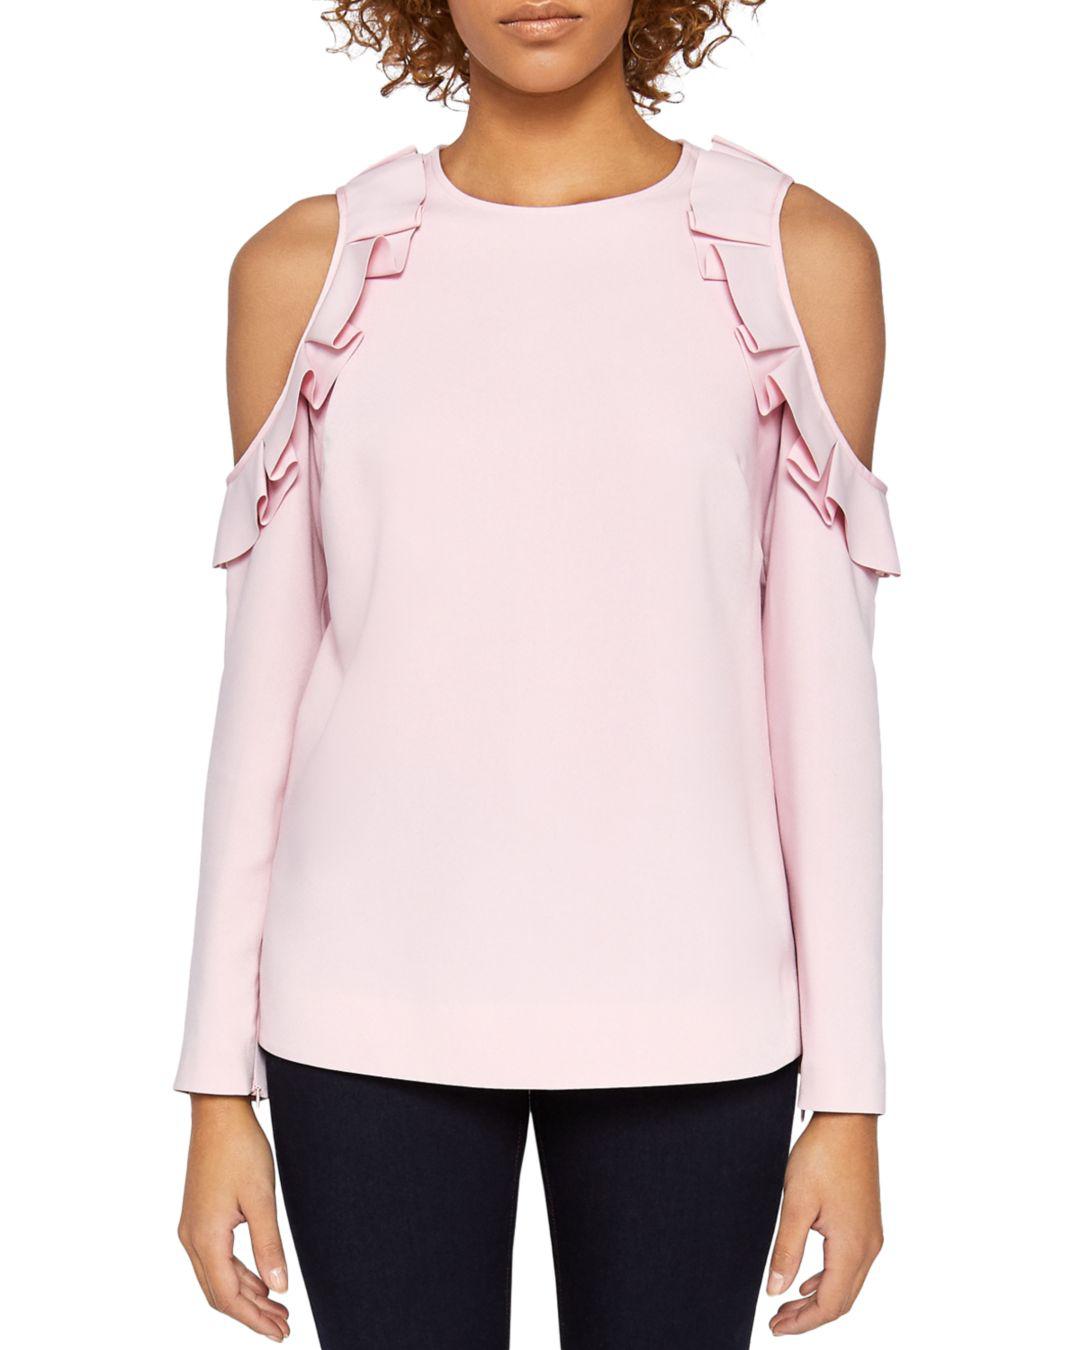 Ted Baker Steffe Ruffled Cold-shoulder Top in Dusky Pink (Pink) - Lyst